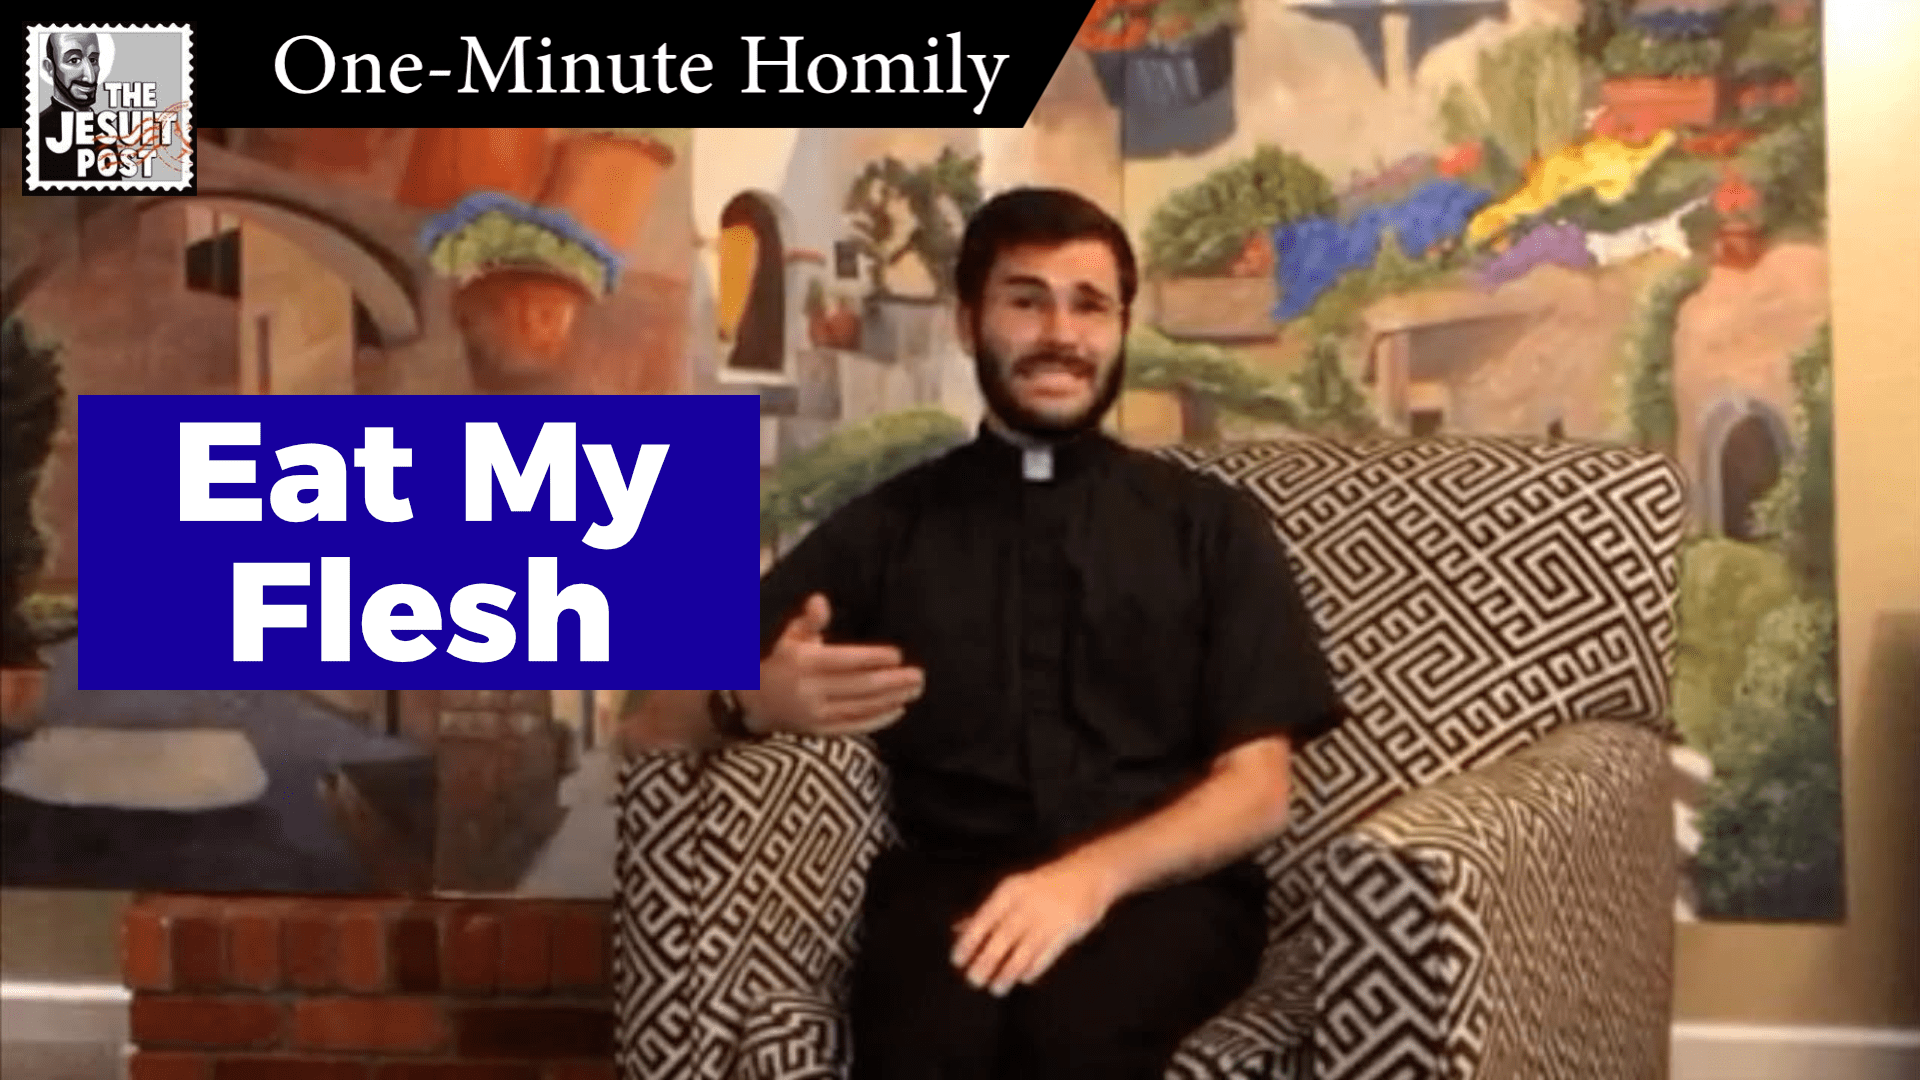 One-Minute Homily: “Eat My Flesh”